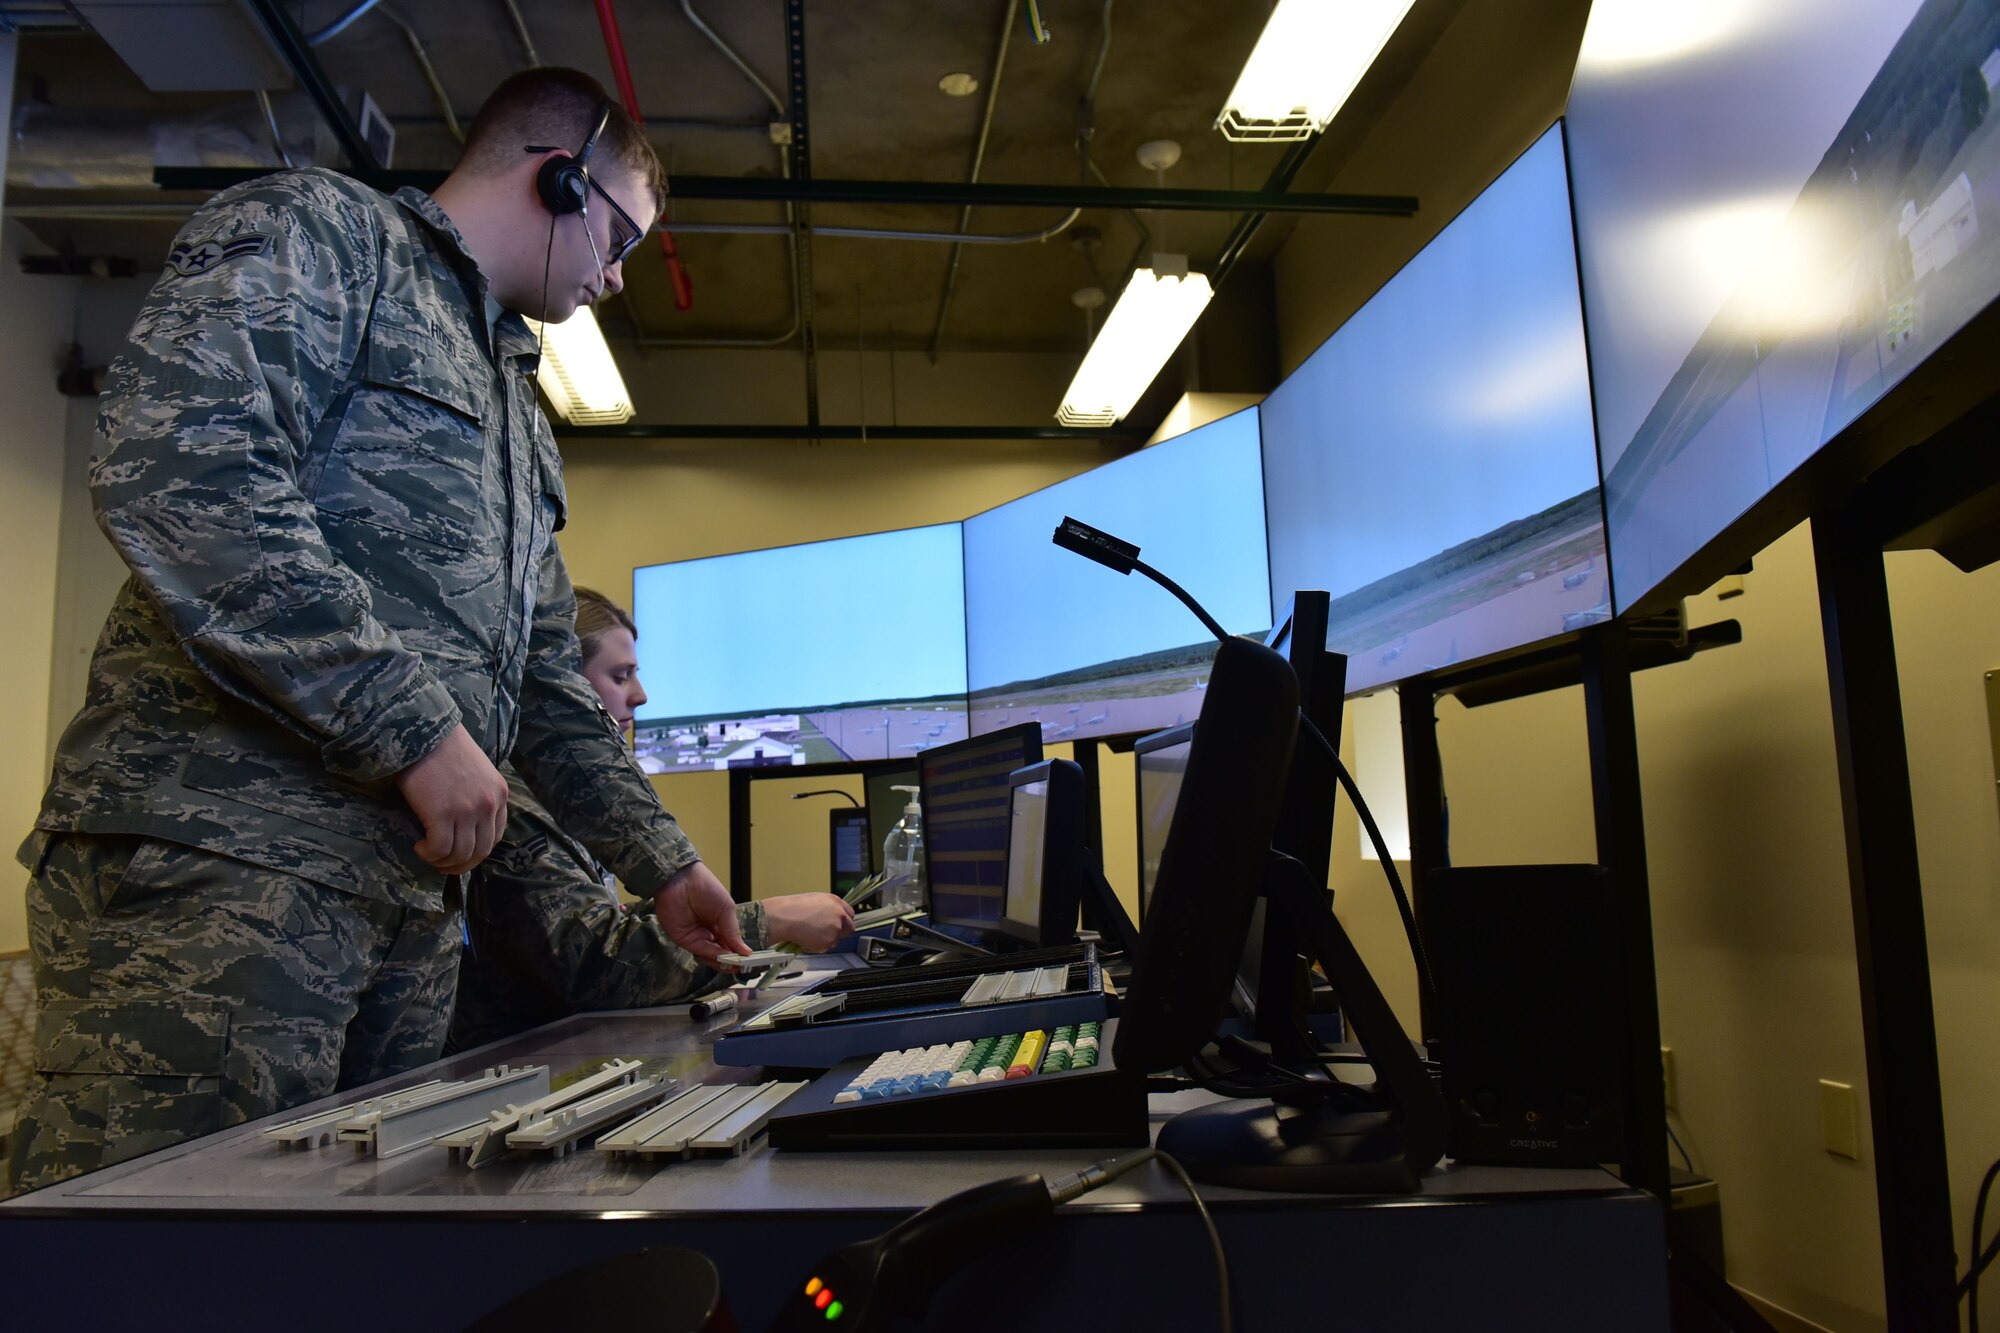 Airmen perform training using simulations in the air traffic control tower.